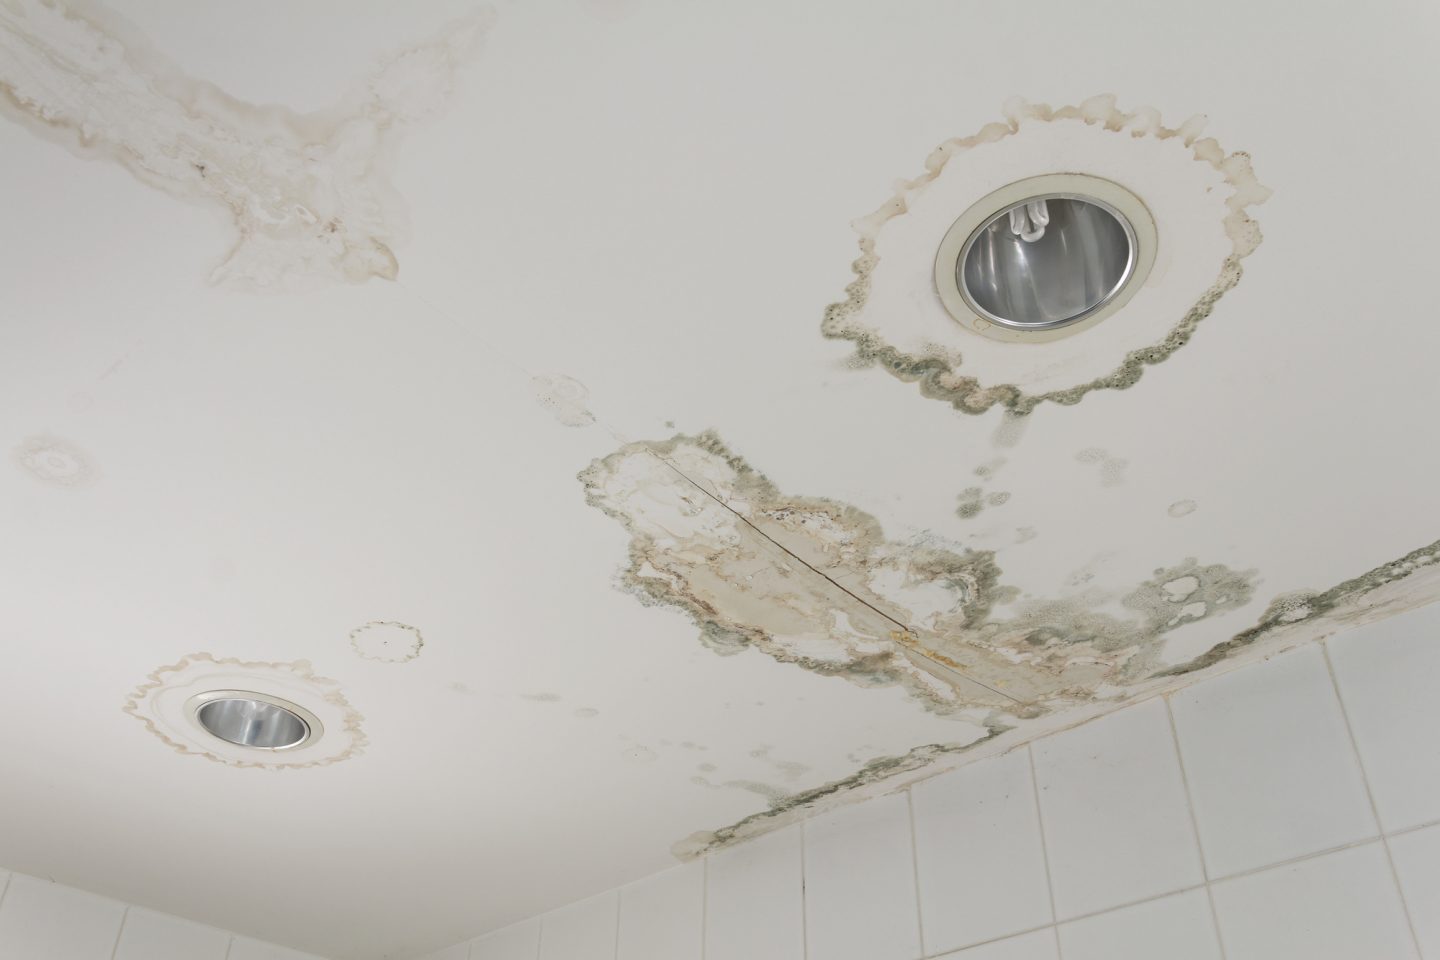 How to Tell If Water Damage Is New or Old